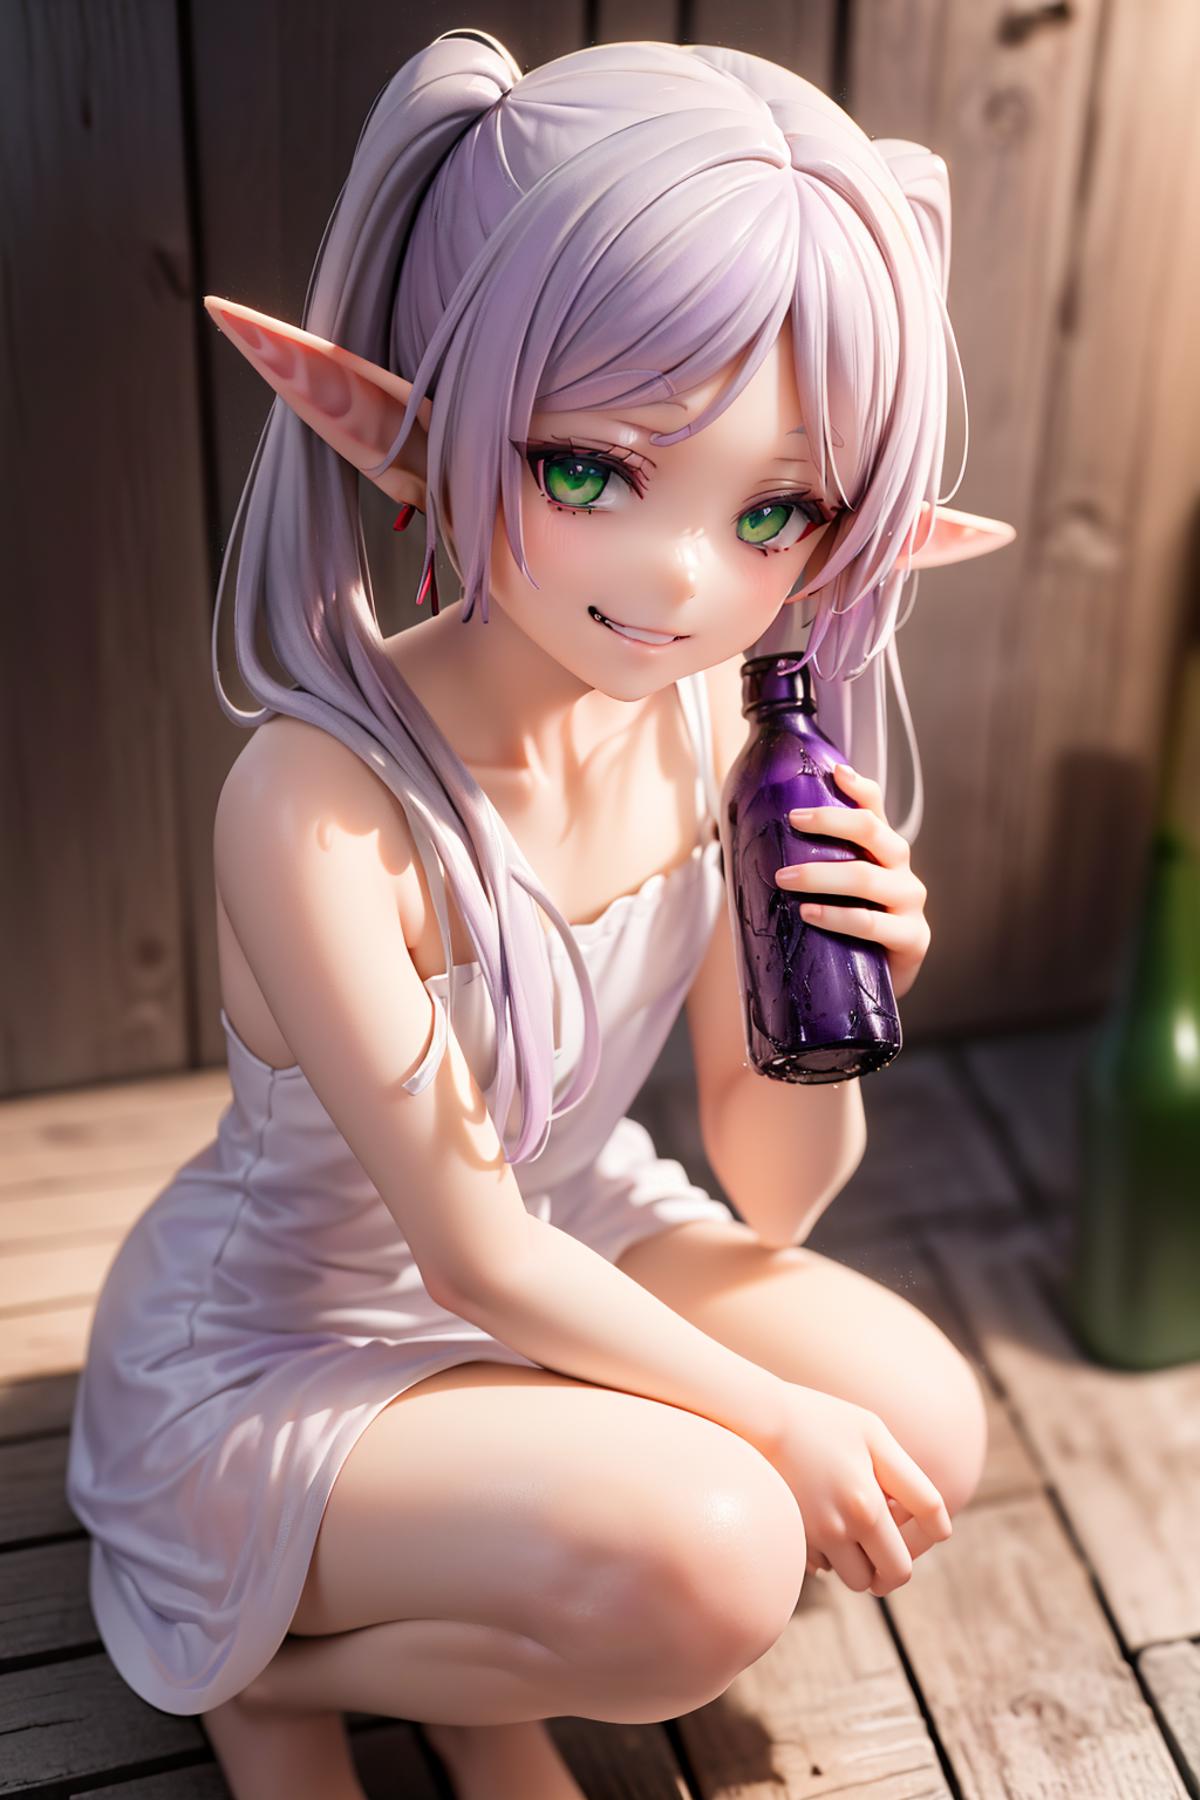 A young girl in a white dress holding a purple bottle.